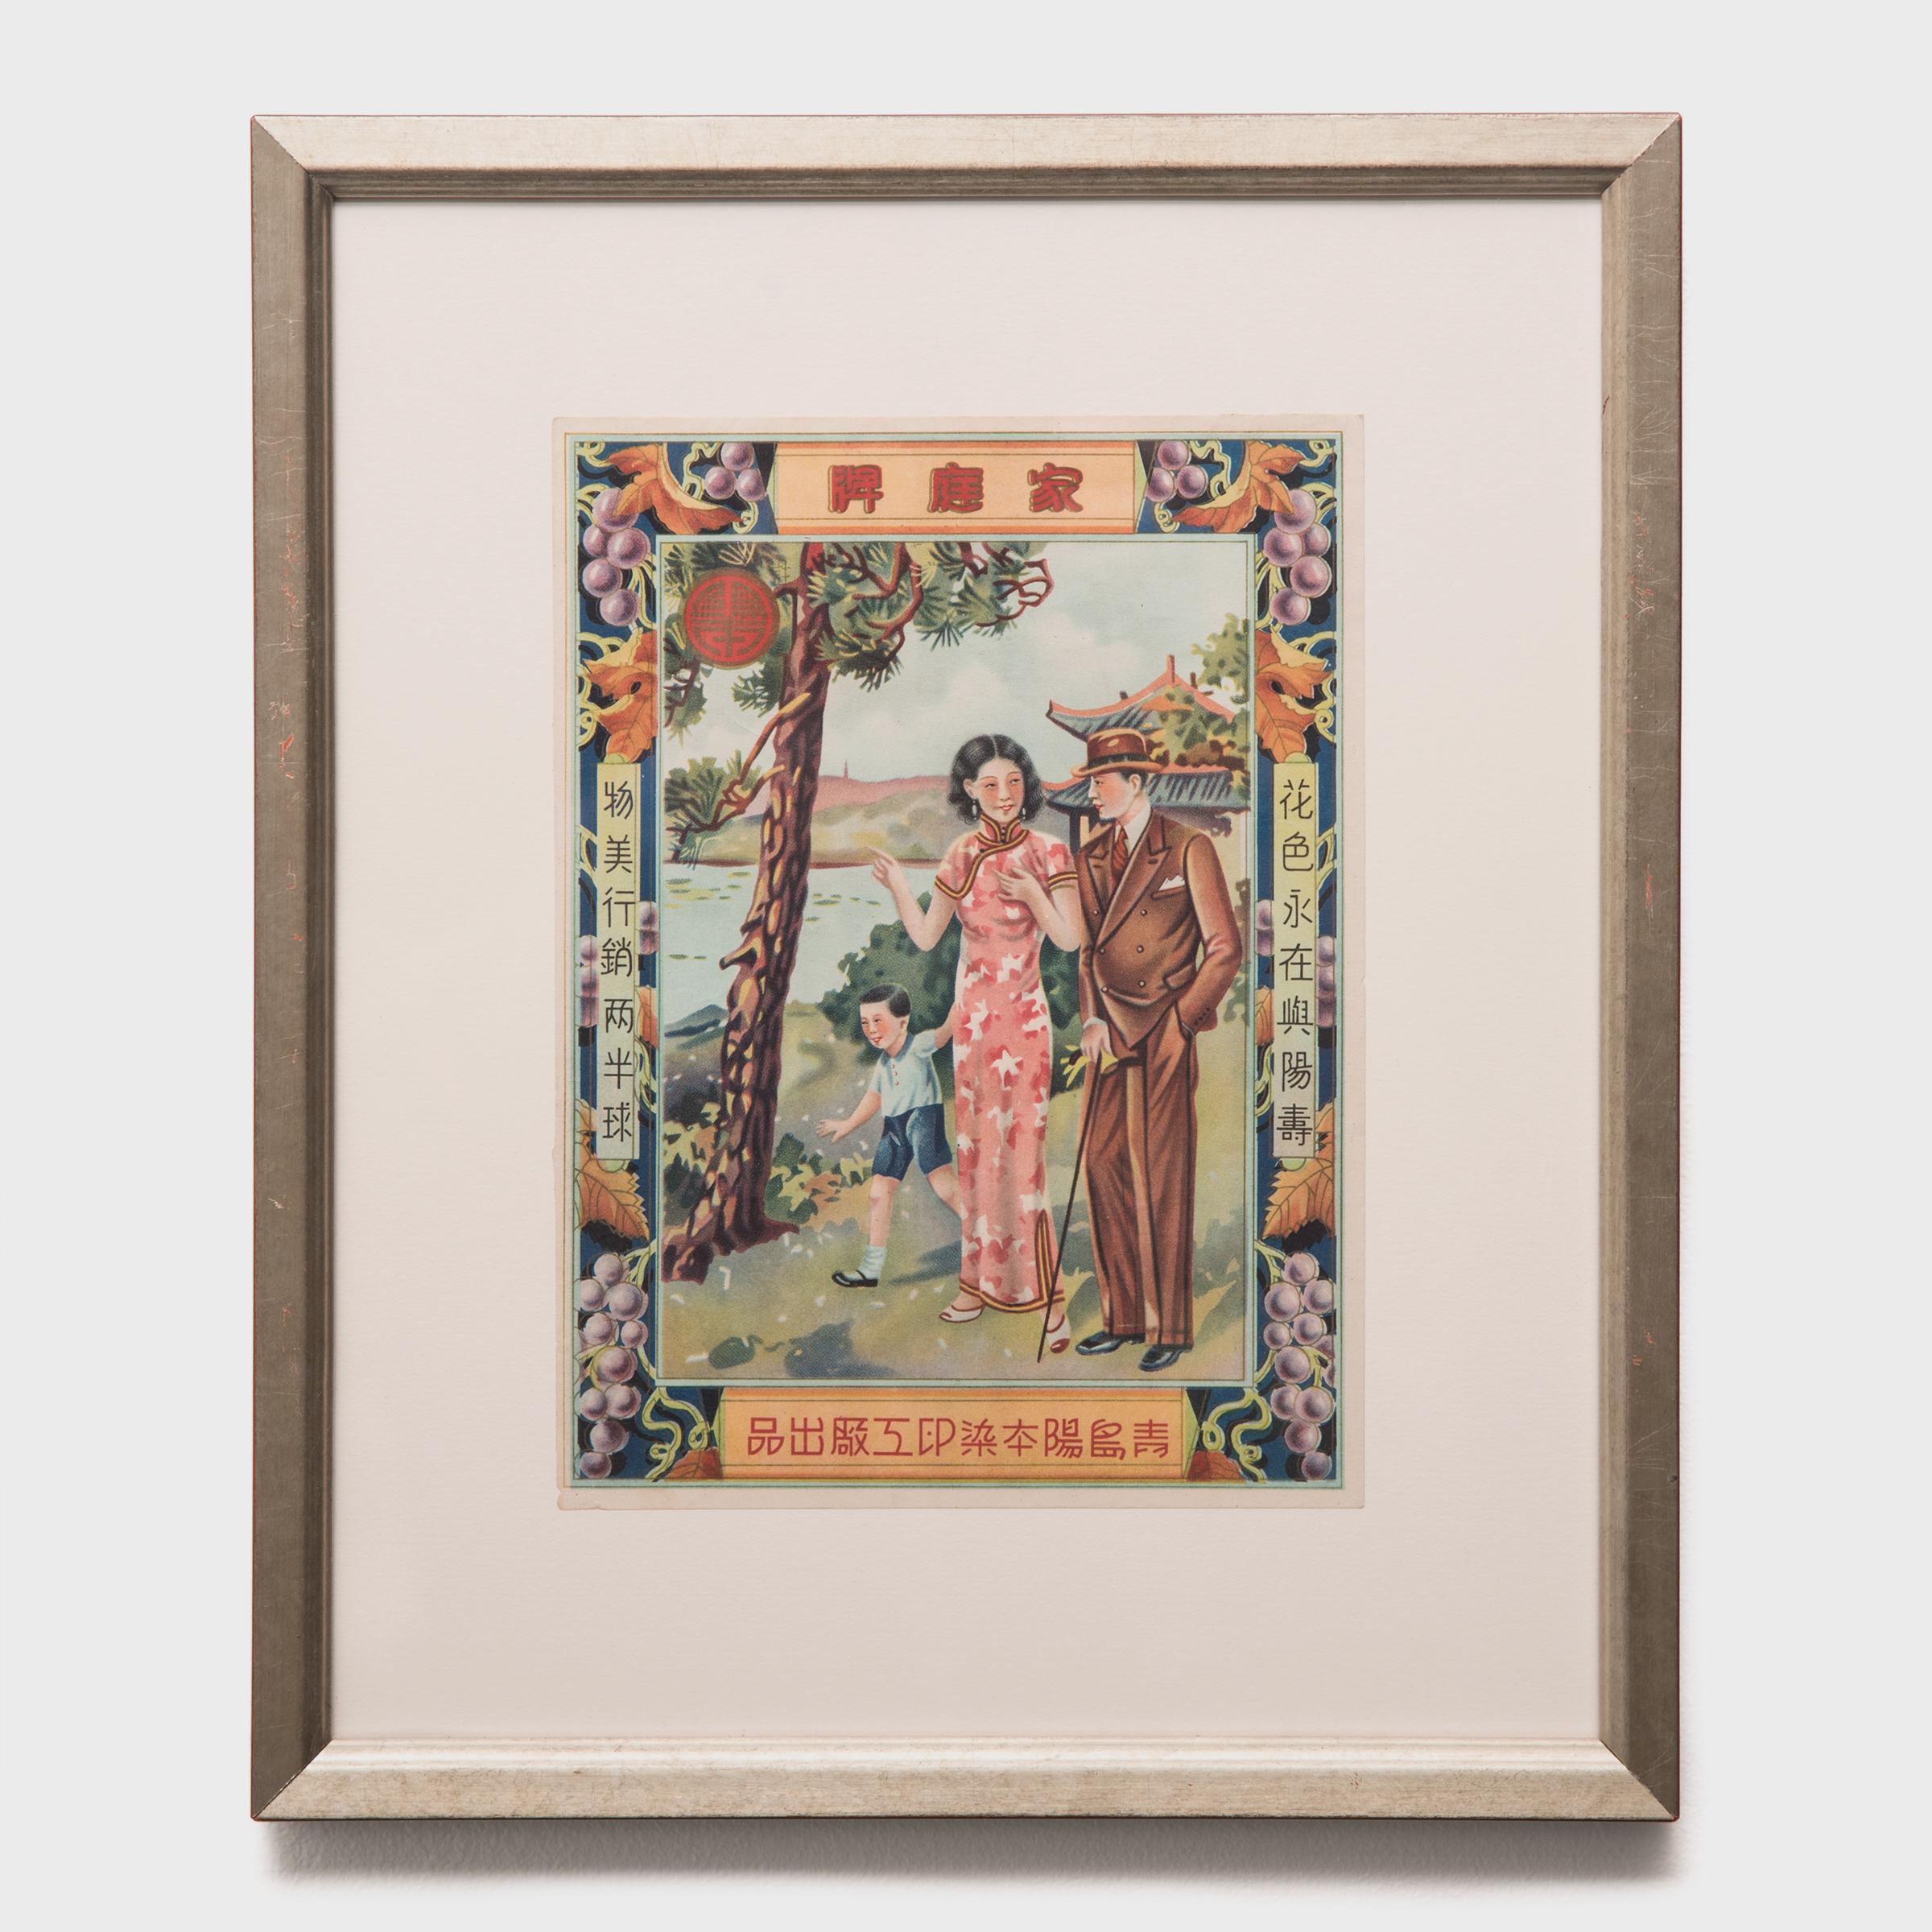 Vintage Chinese Republic Period Advertisement - Print by Unknown